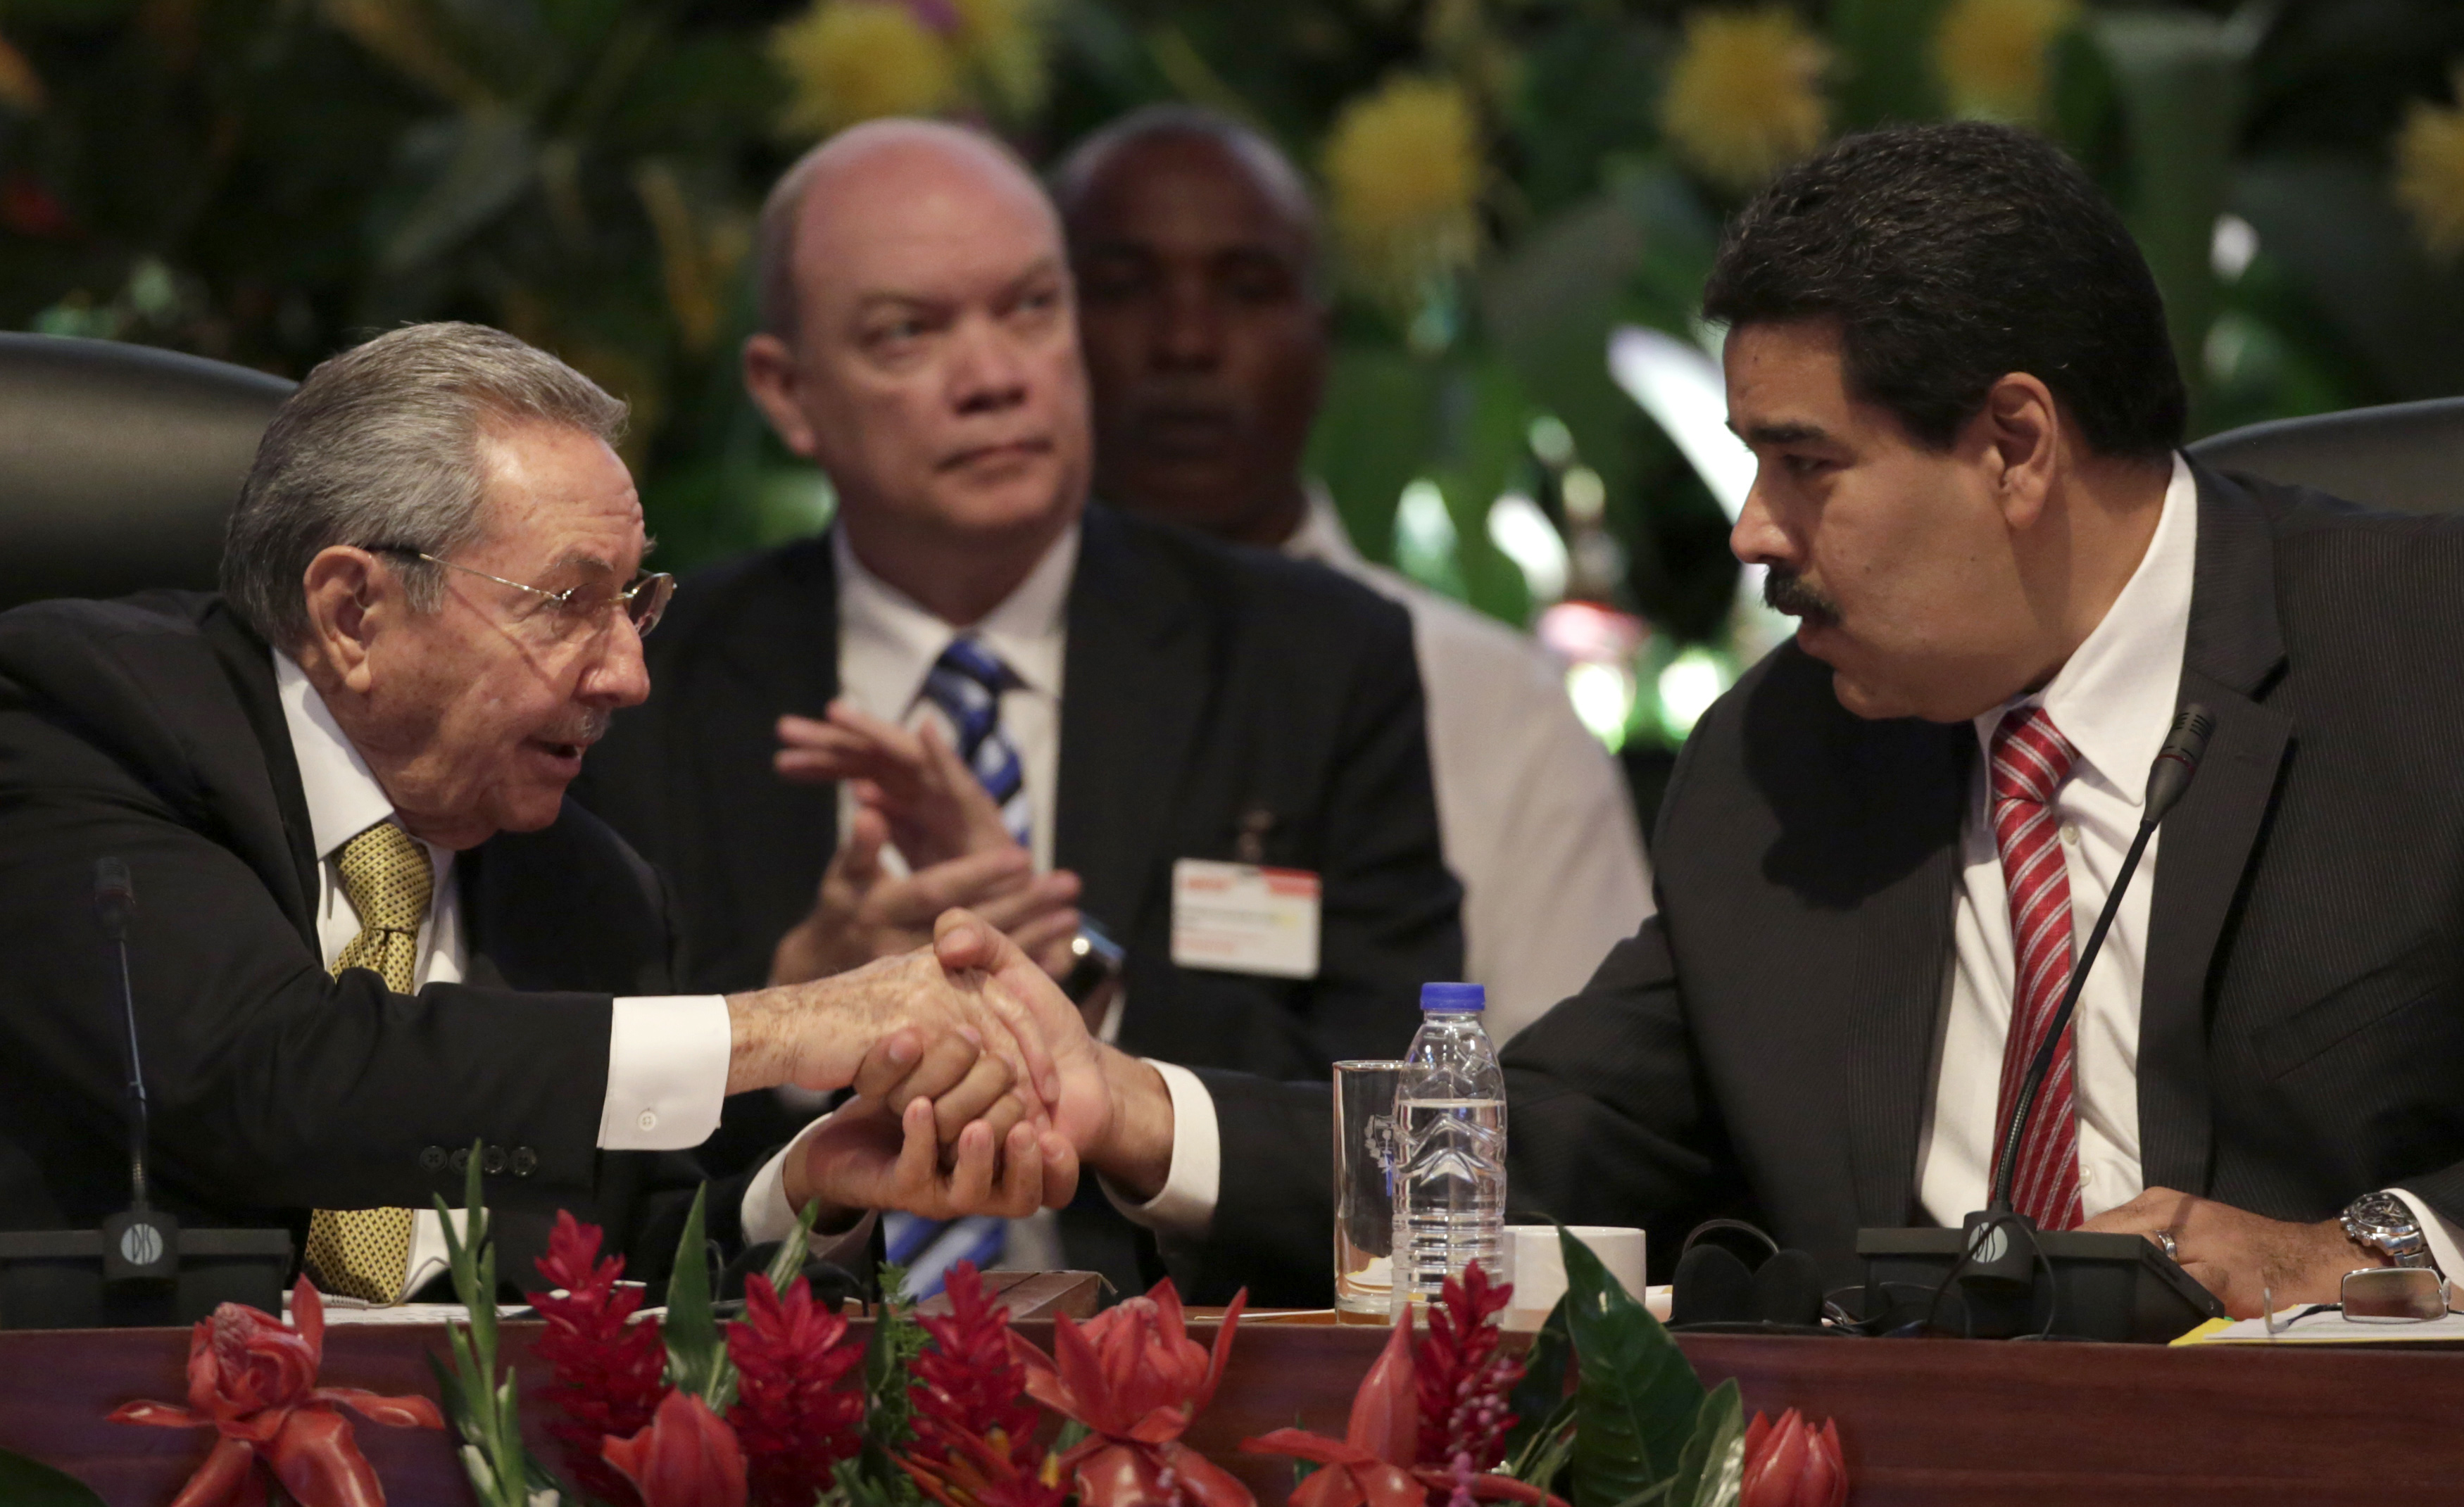 From Left: Cuba's President Raul Castro shakes hands with Venezuela's President Nicolas Maduro during the opening session of the 10th ALBA alliance summit in Havana on Dec. 14, 2014. (© Enrique de la Osa / Reuters&mdash;REUTERS)